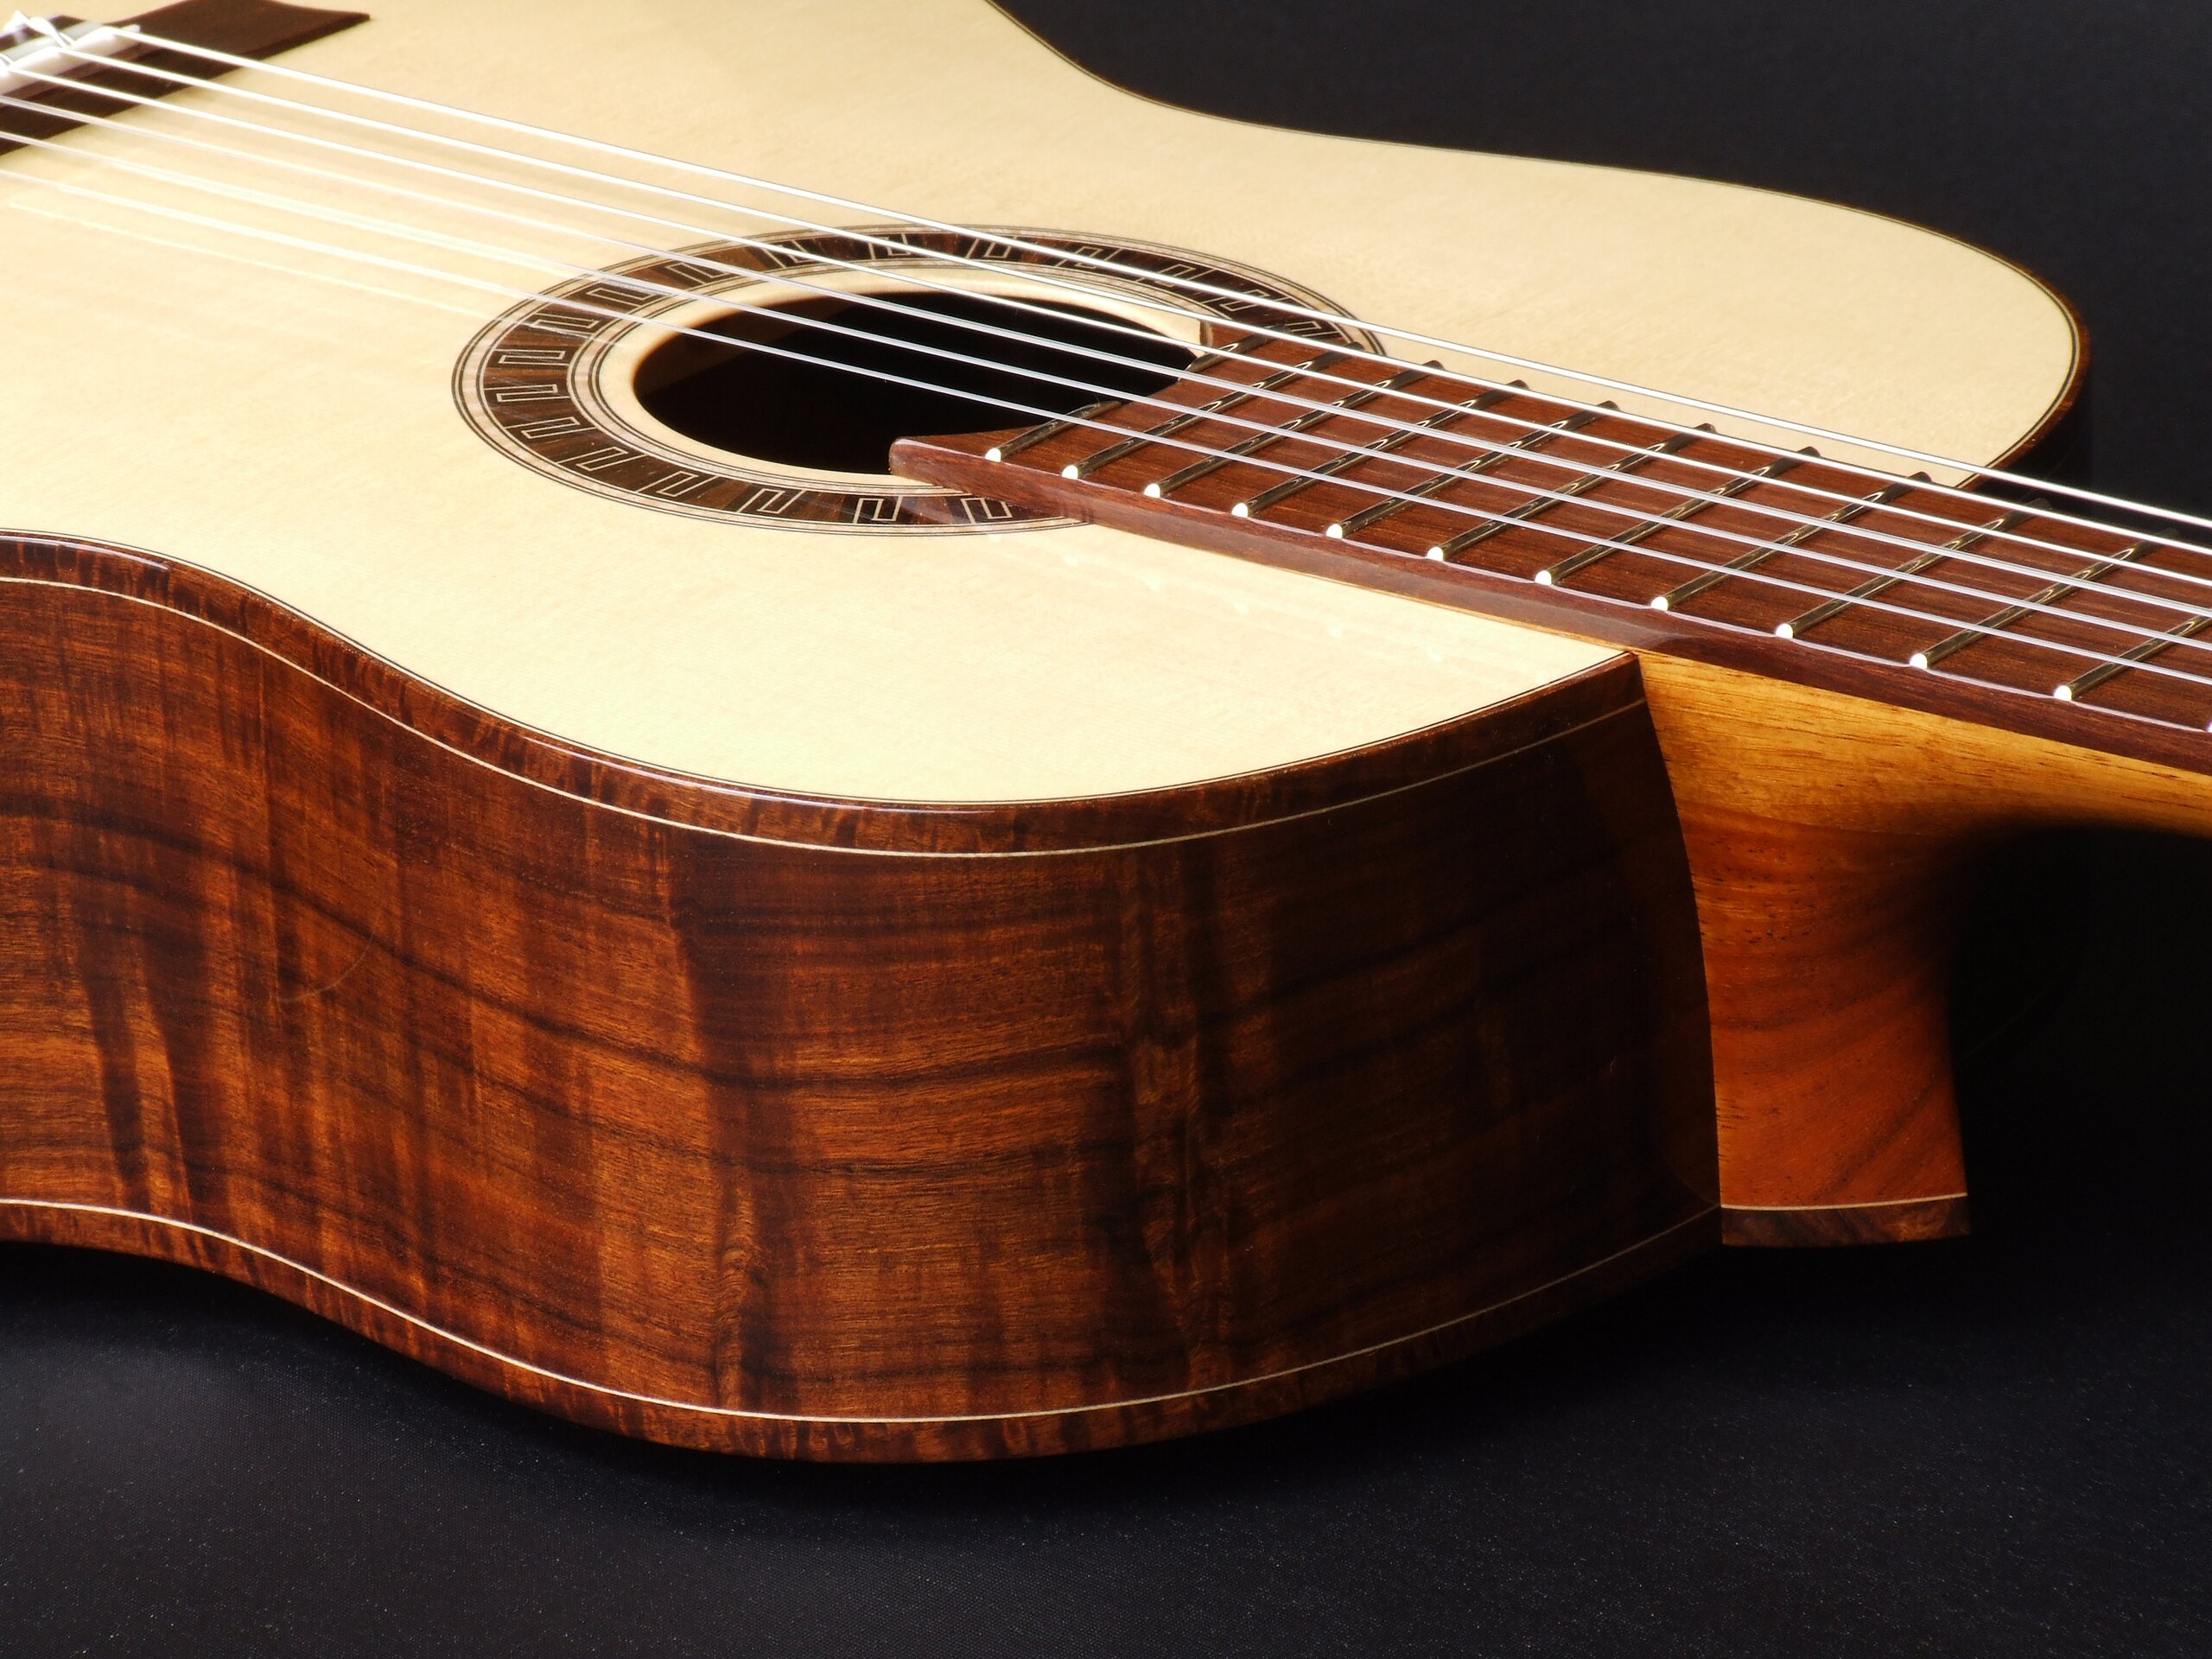 Custom guitars. Neck joint on a gidgee bodied classical guitar by Trevor Gore